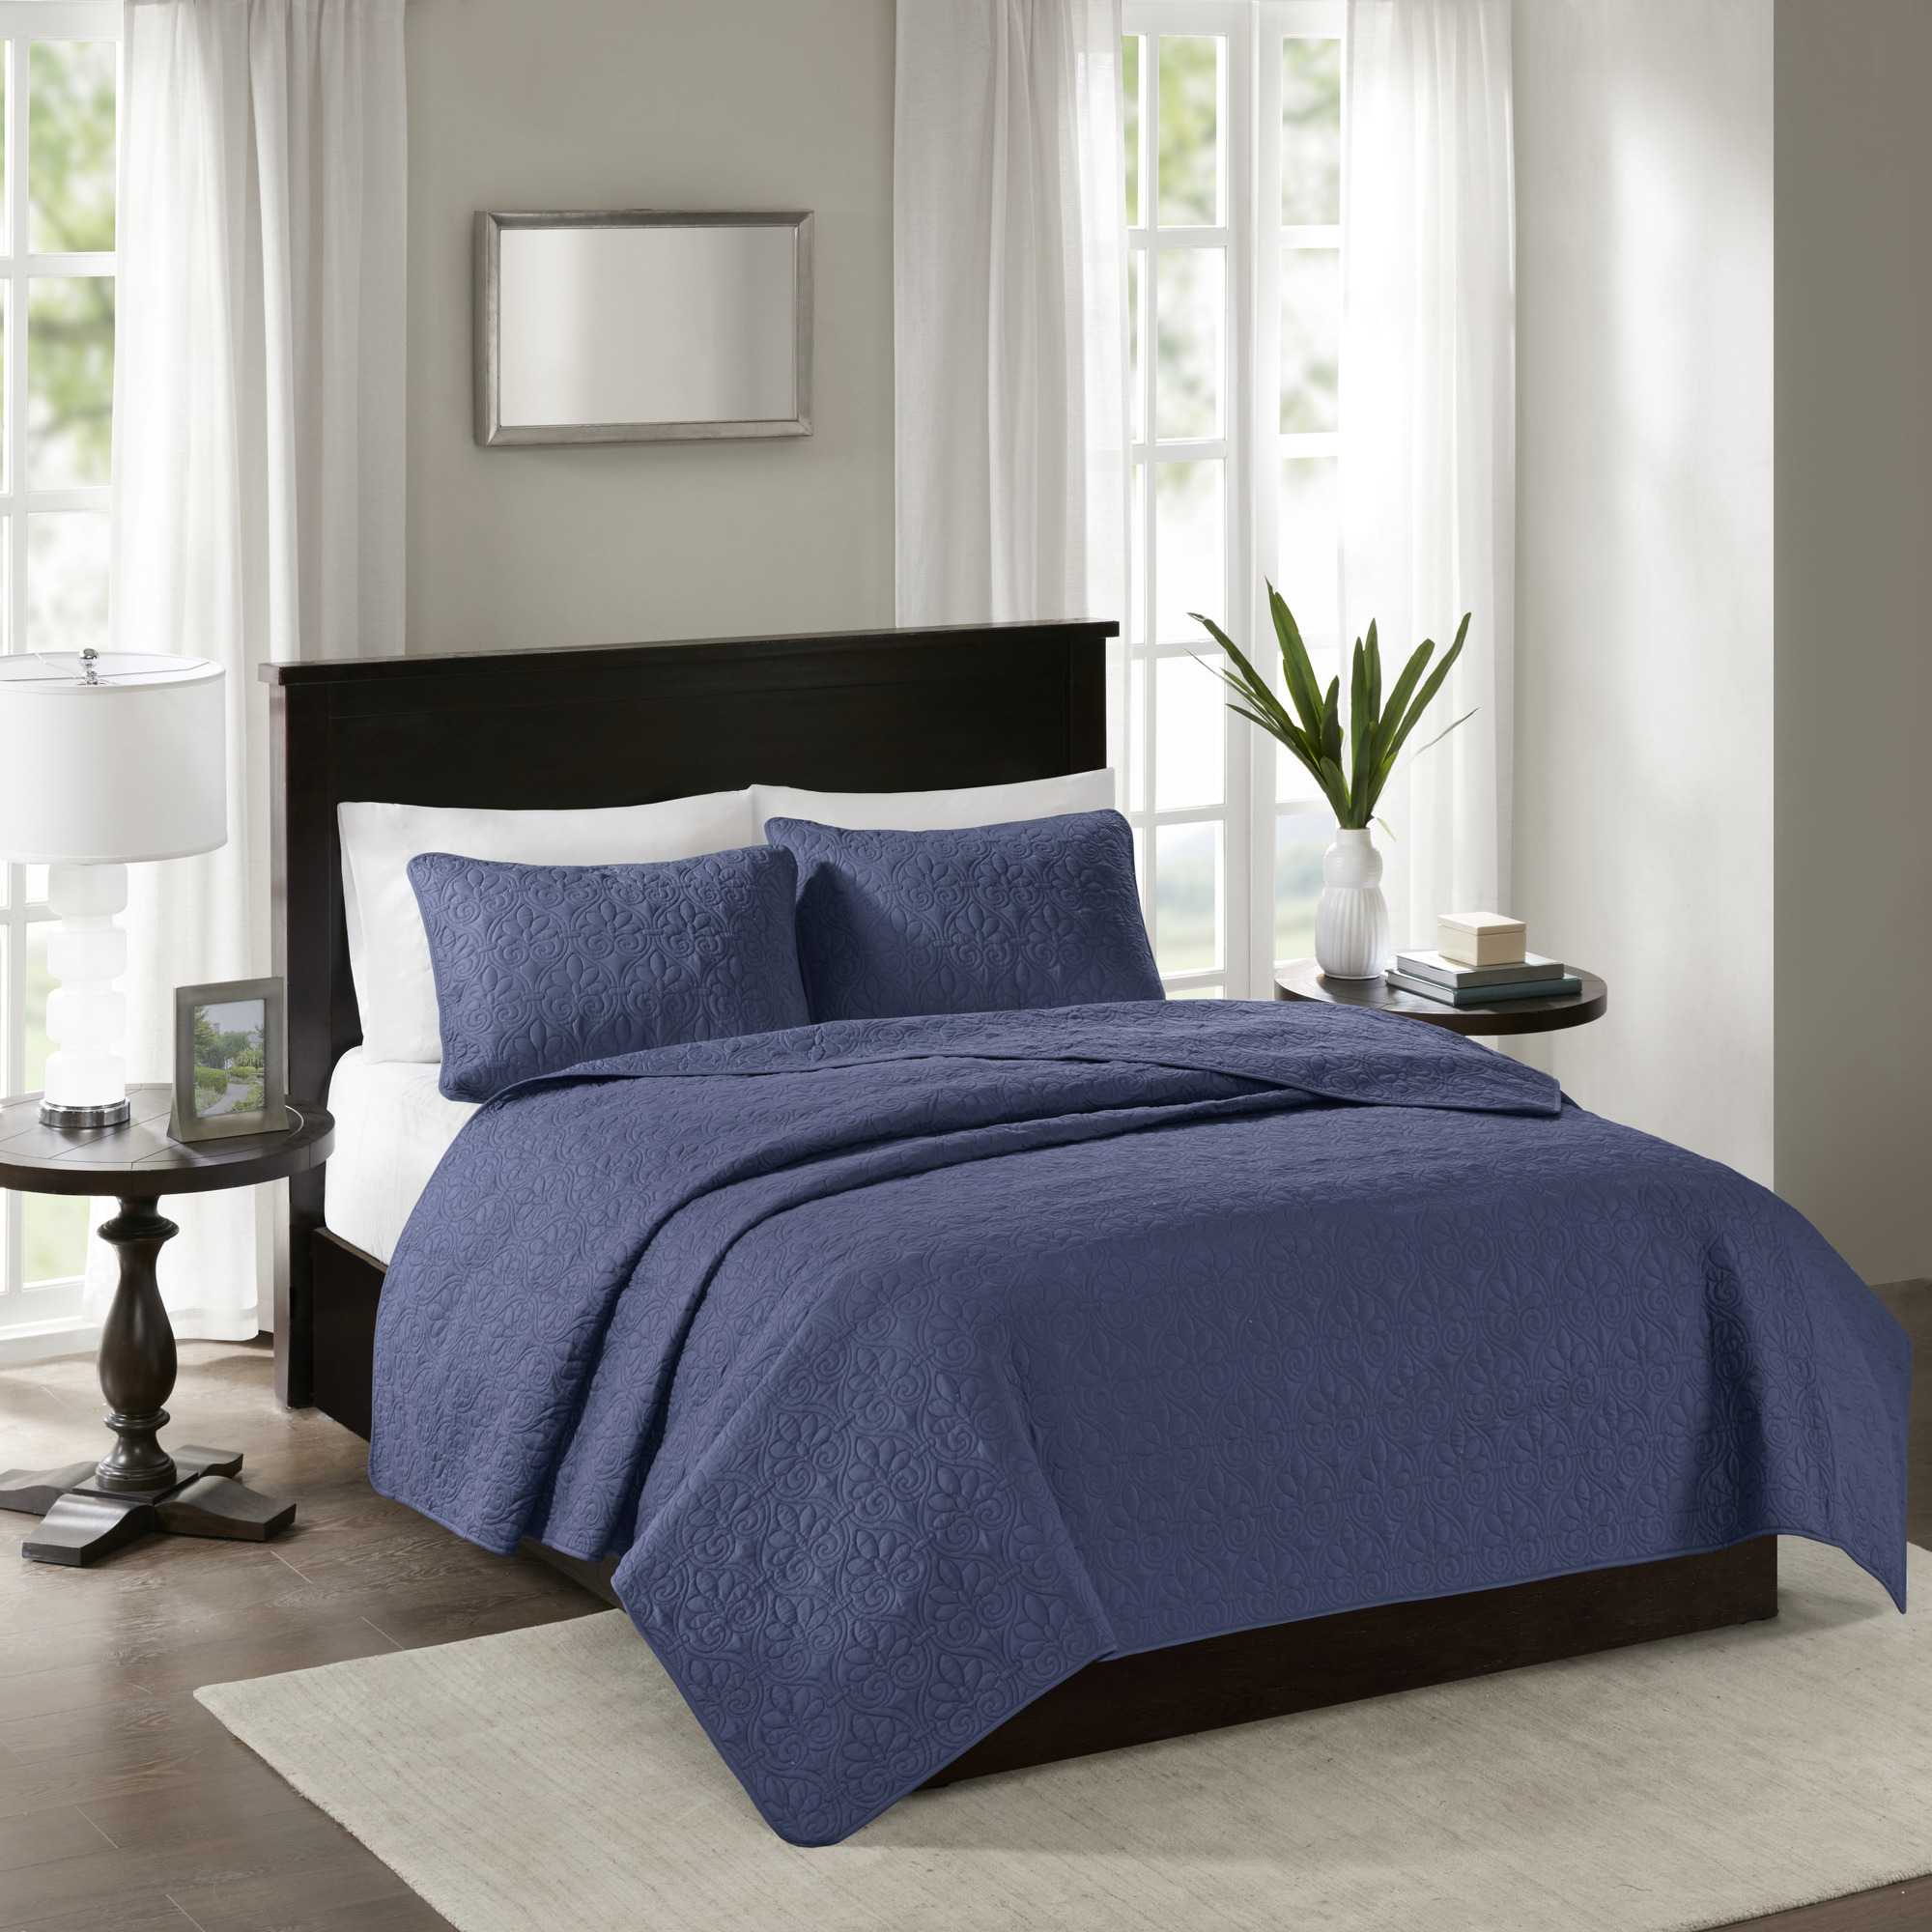 Home Essence Vancouver Super Soft Reversible Coverlet Set, Full/Queen, Navy - image 3 of 13